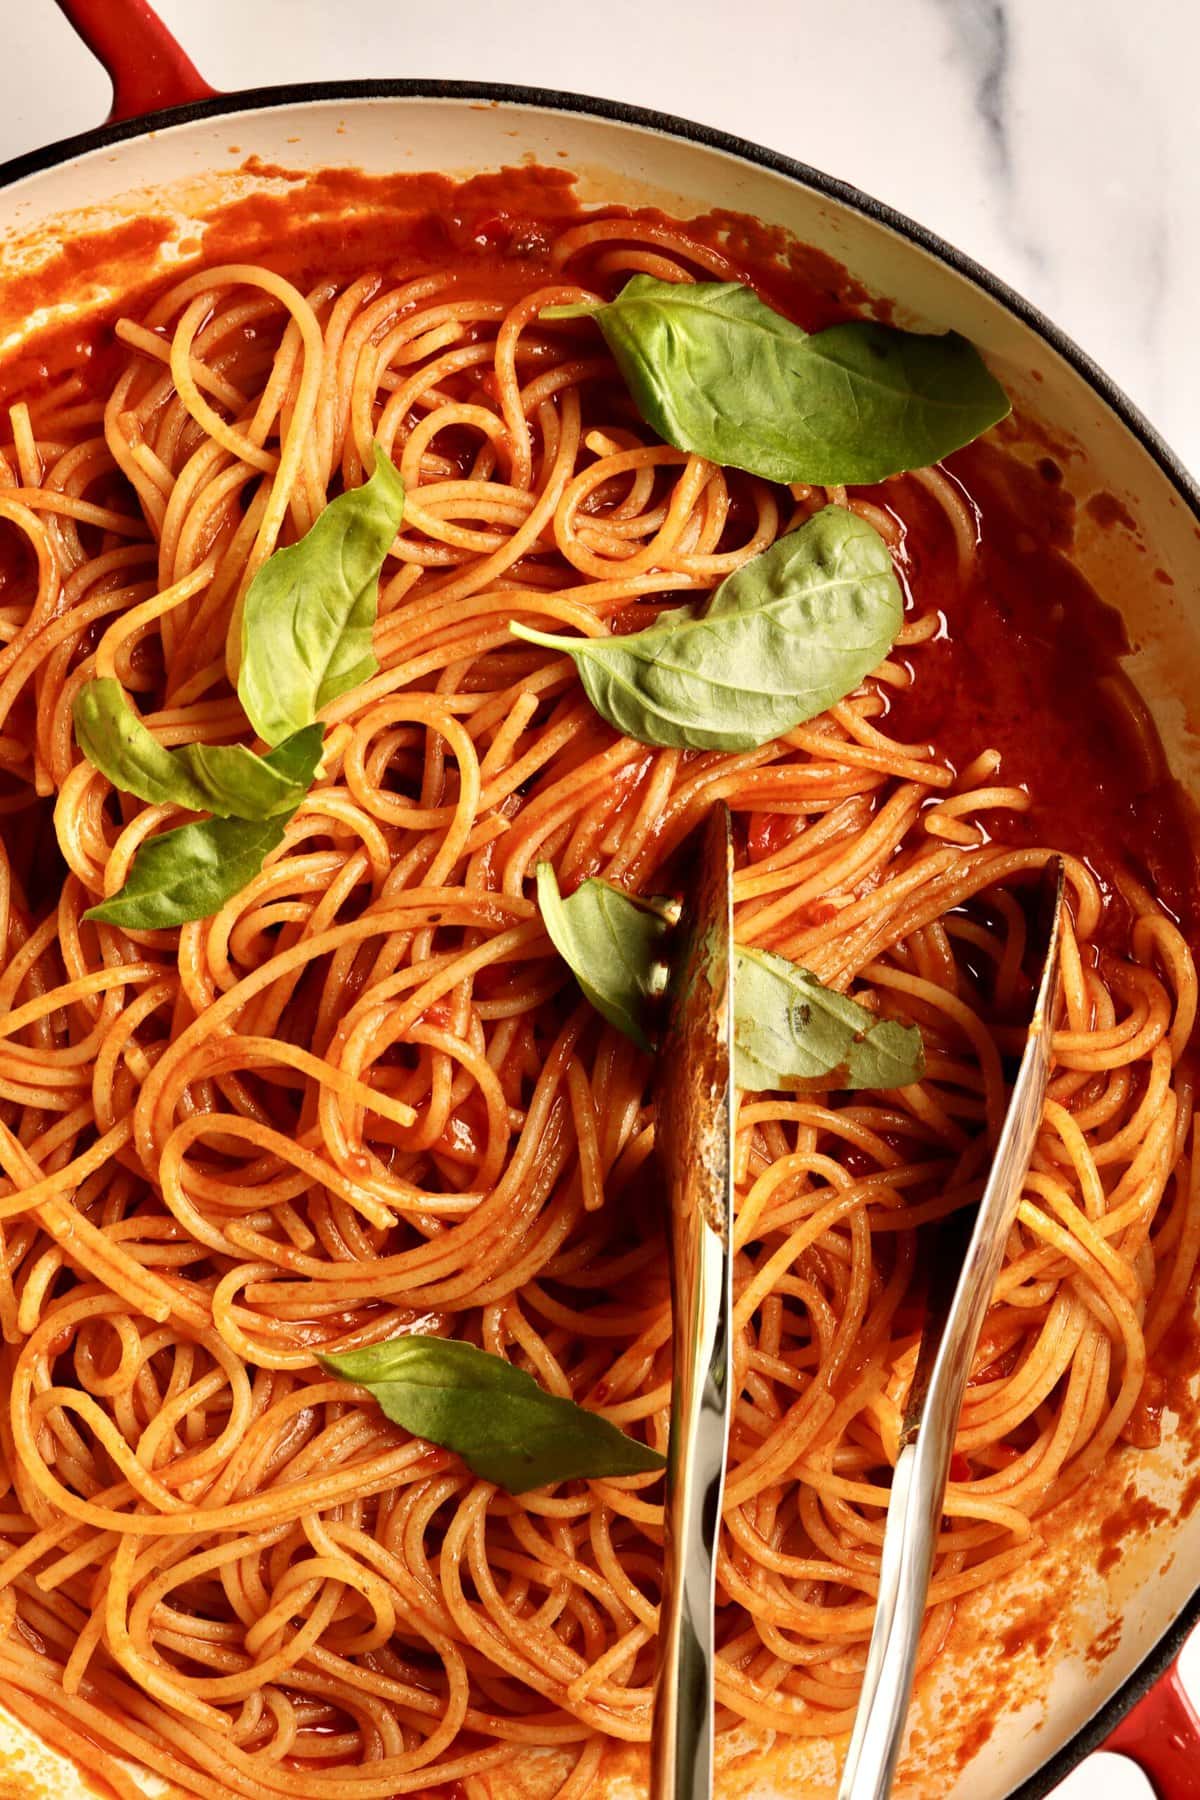 How to make: Quick Tomato Paste Pasta Sauce Recipe with Spaghetti- add the al dente pasta to the pan with the pasta sauce and stir to combine. Add fresh basil and toss.